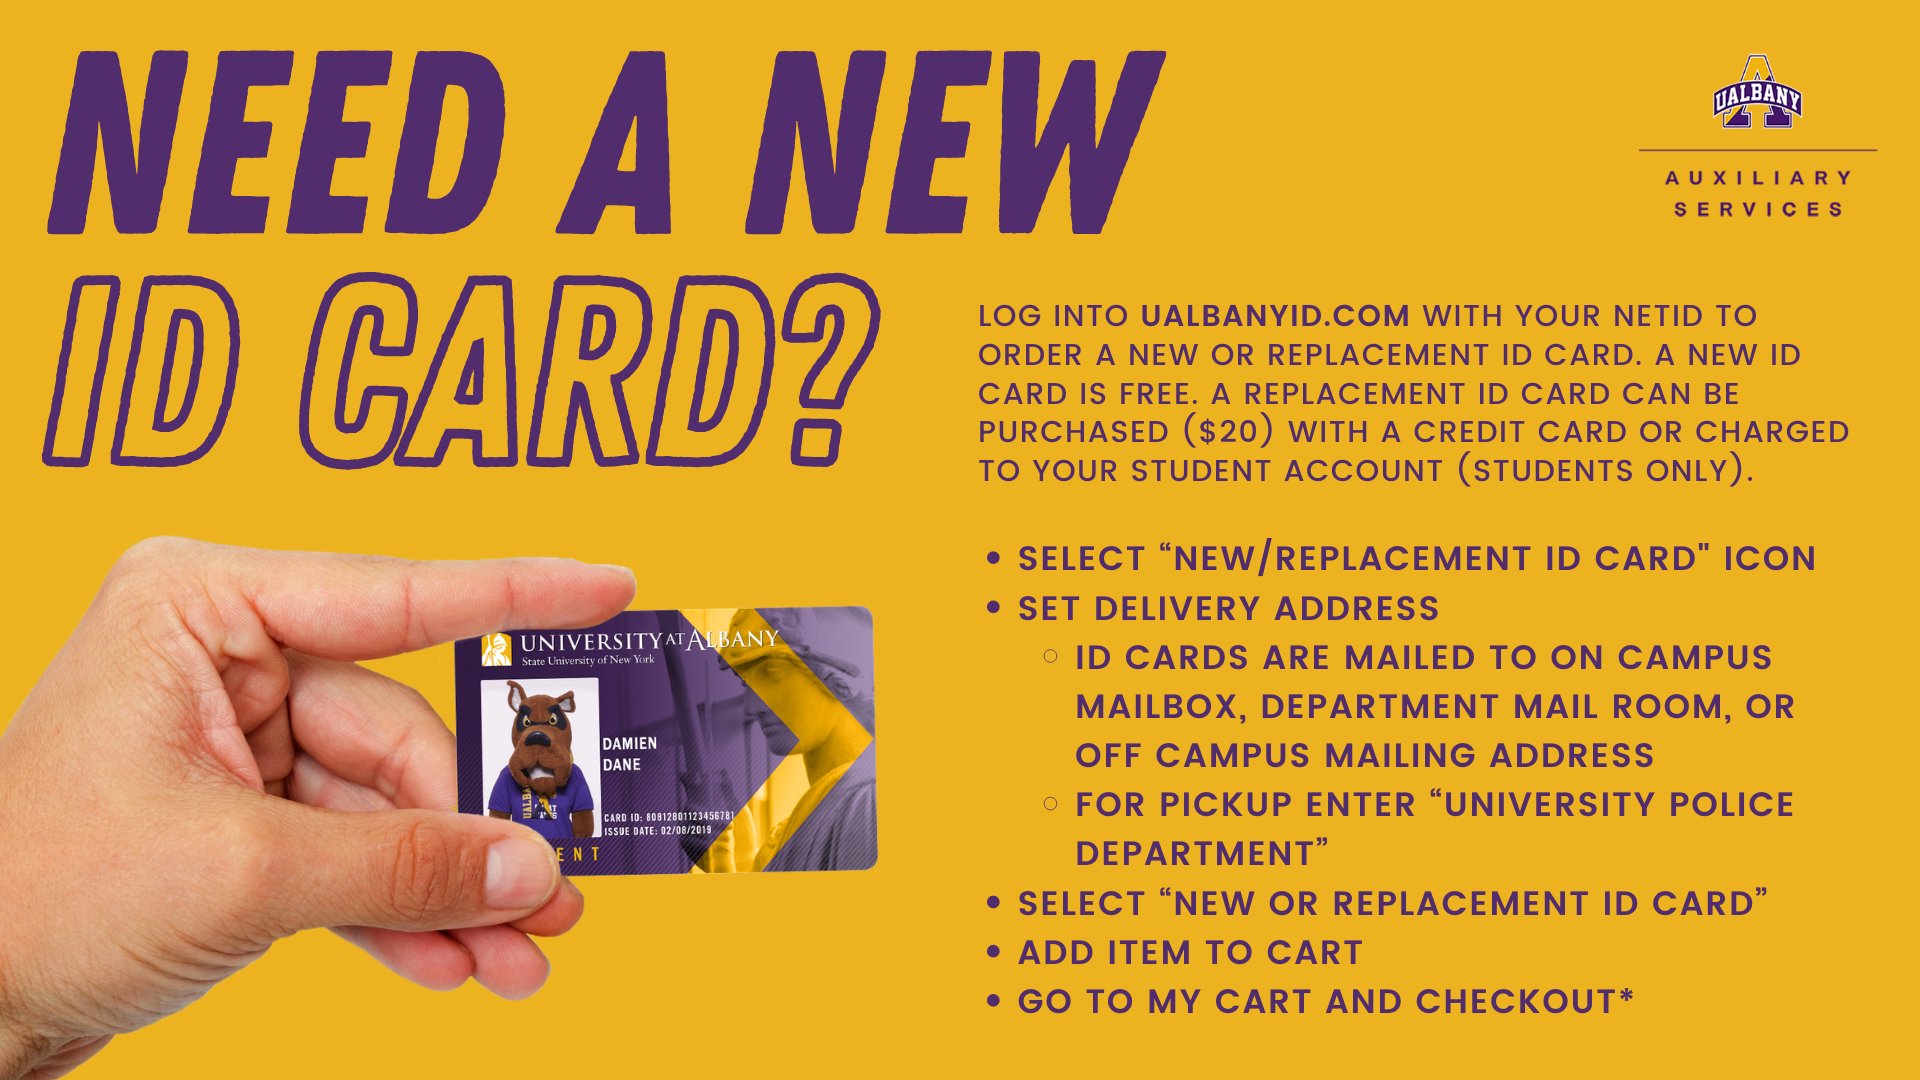 UAS Albany on Twitter: "Need a new ID Card or a replacement? Order